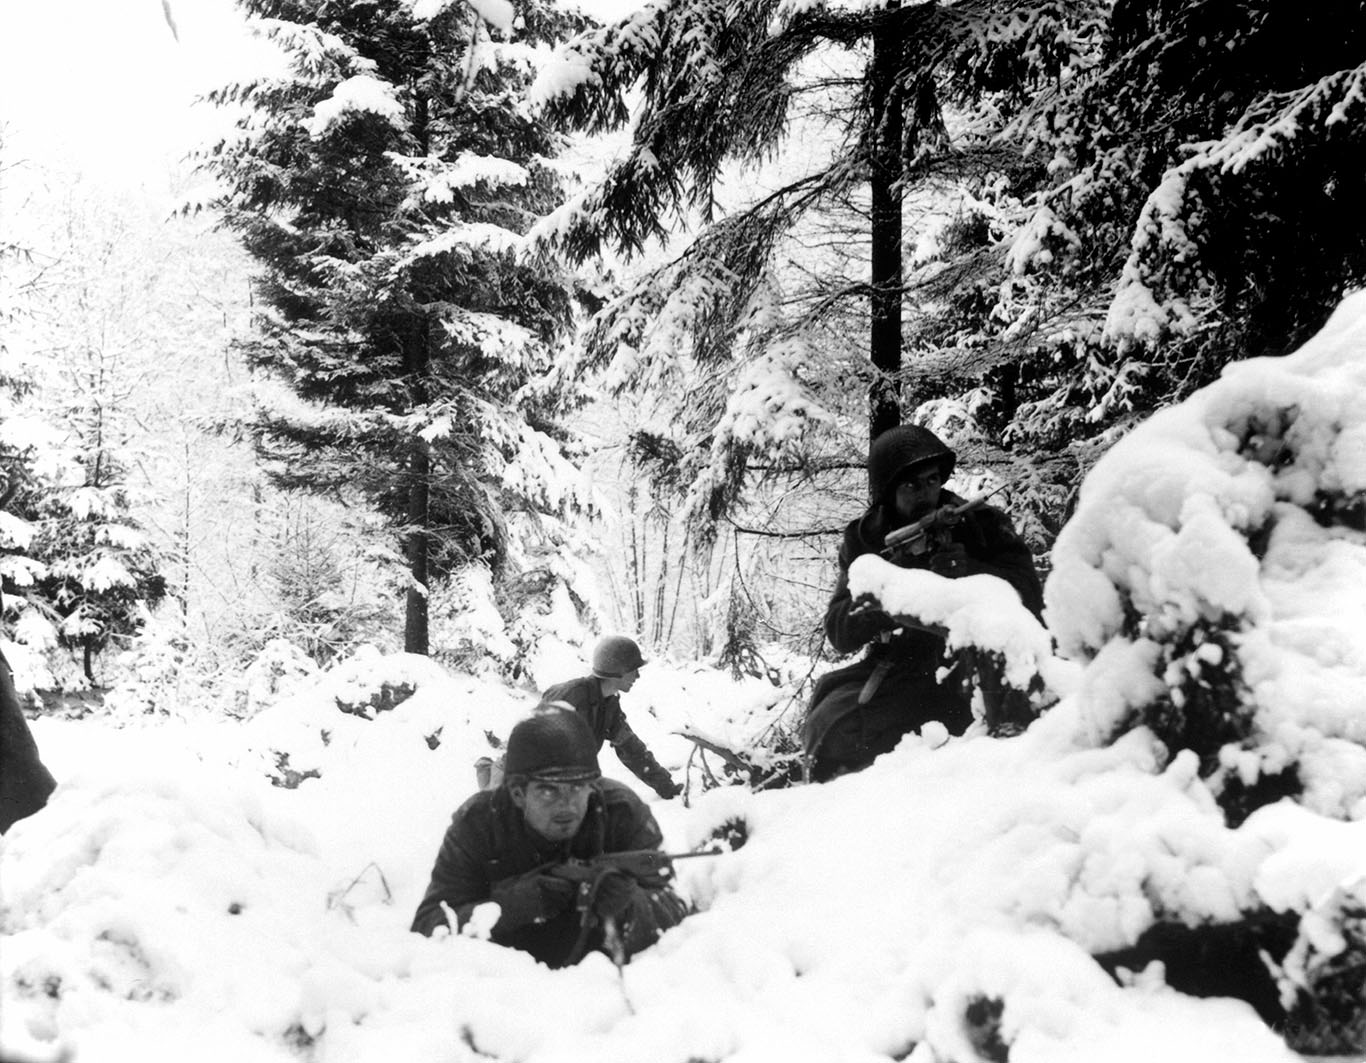 soldiers hiding in snowy bushes